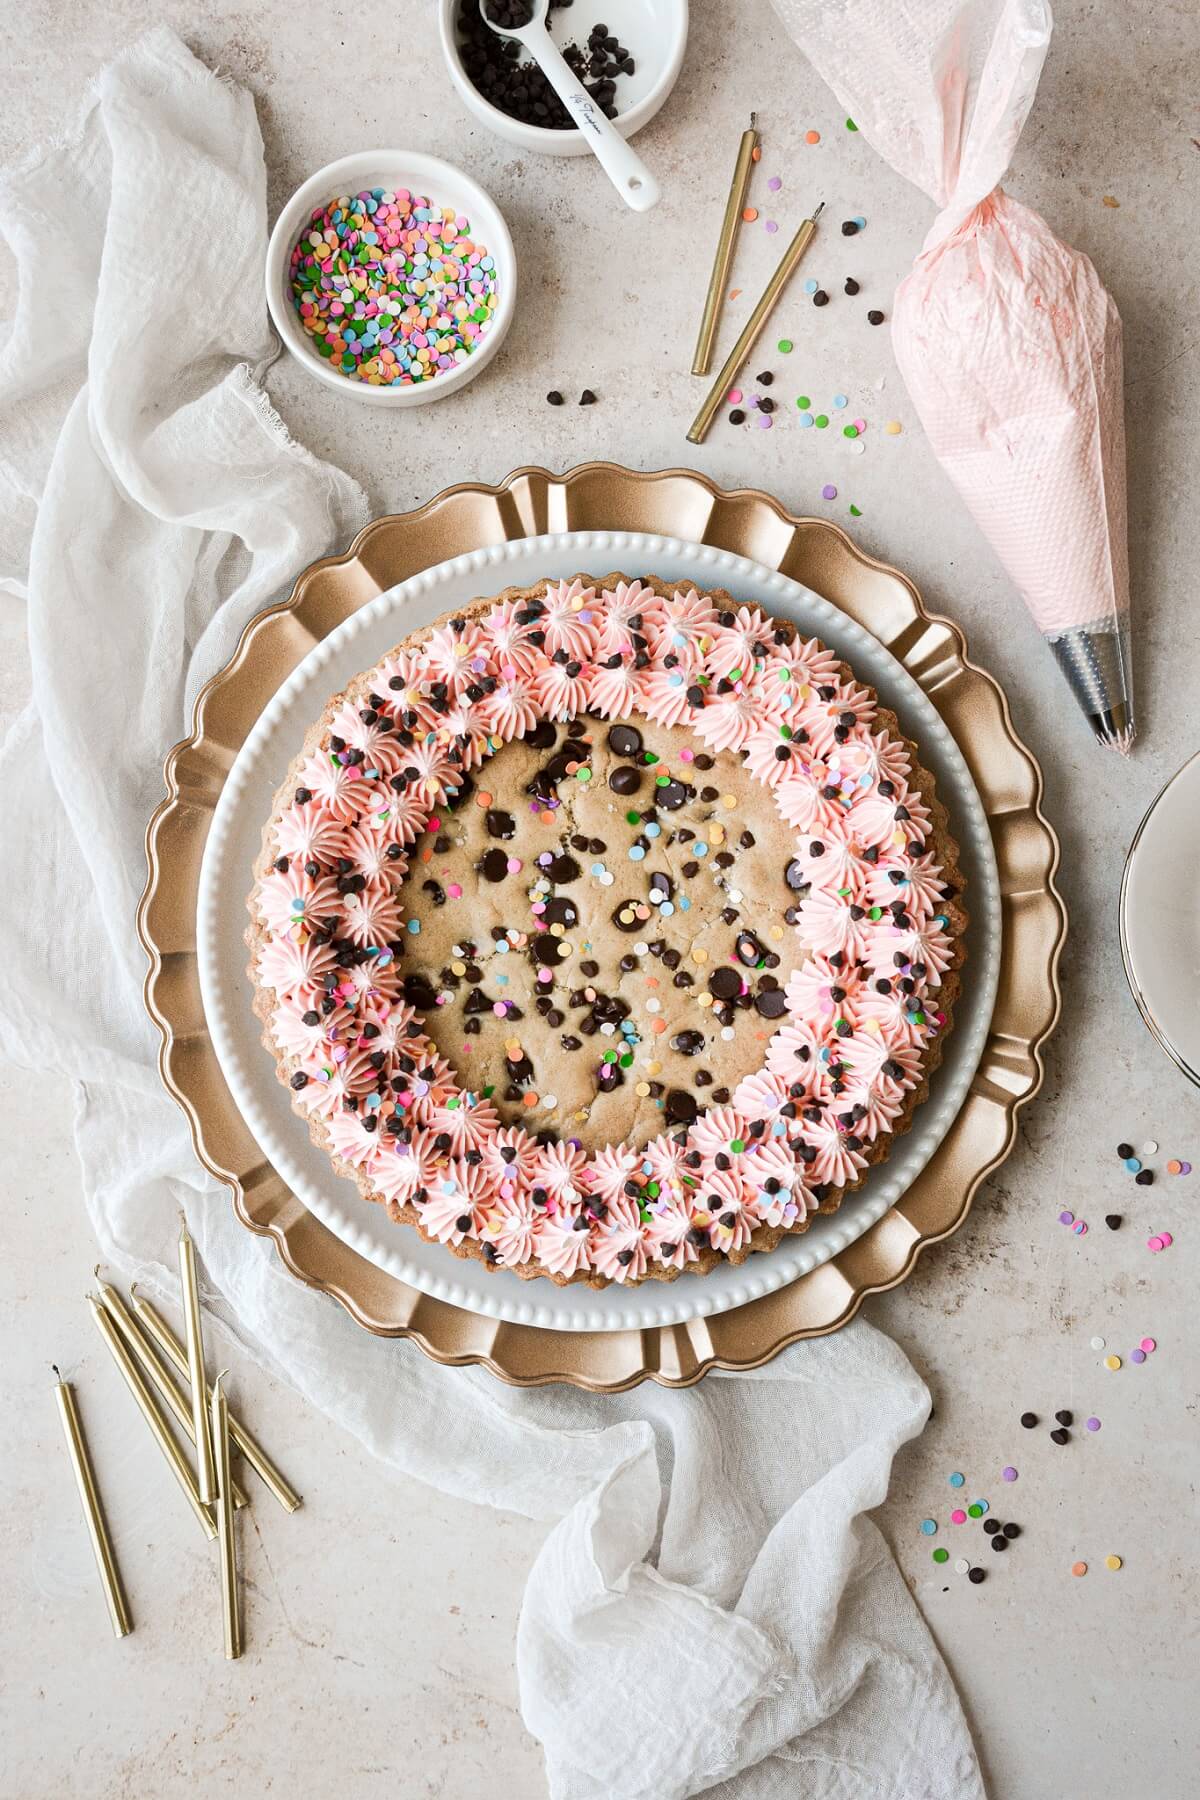 A big chocolate chip cookie birthday cake with pink frosting and sprinkles.